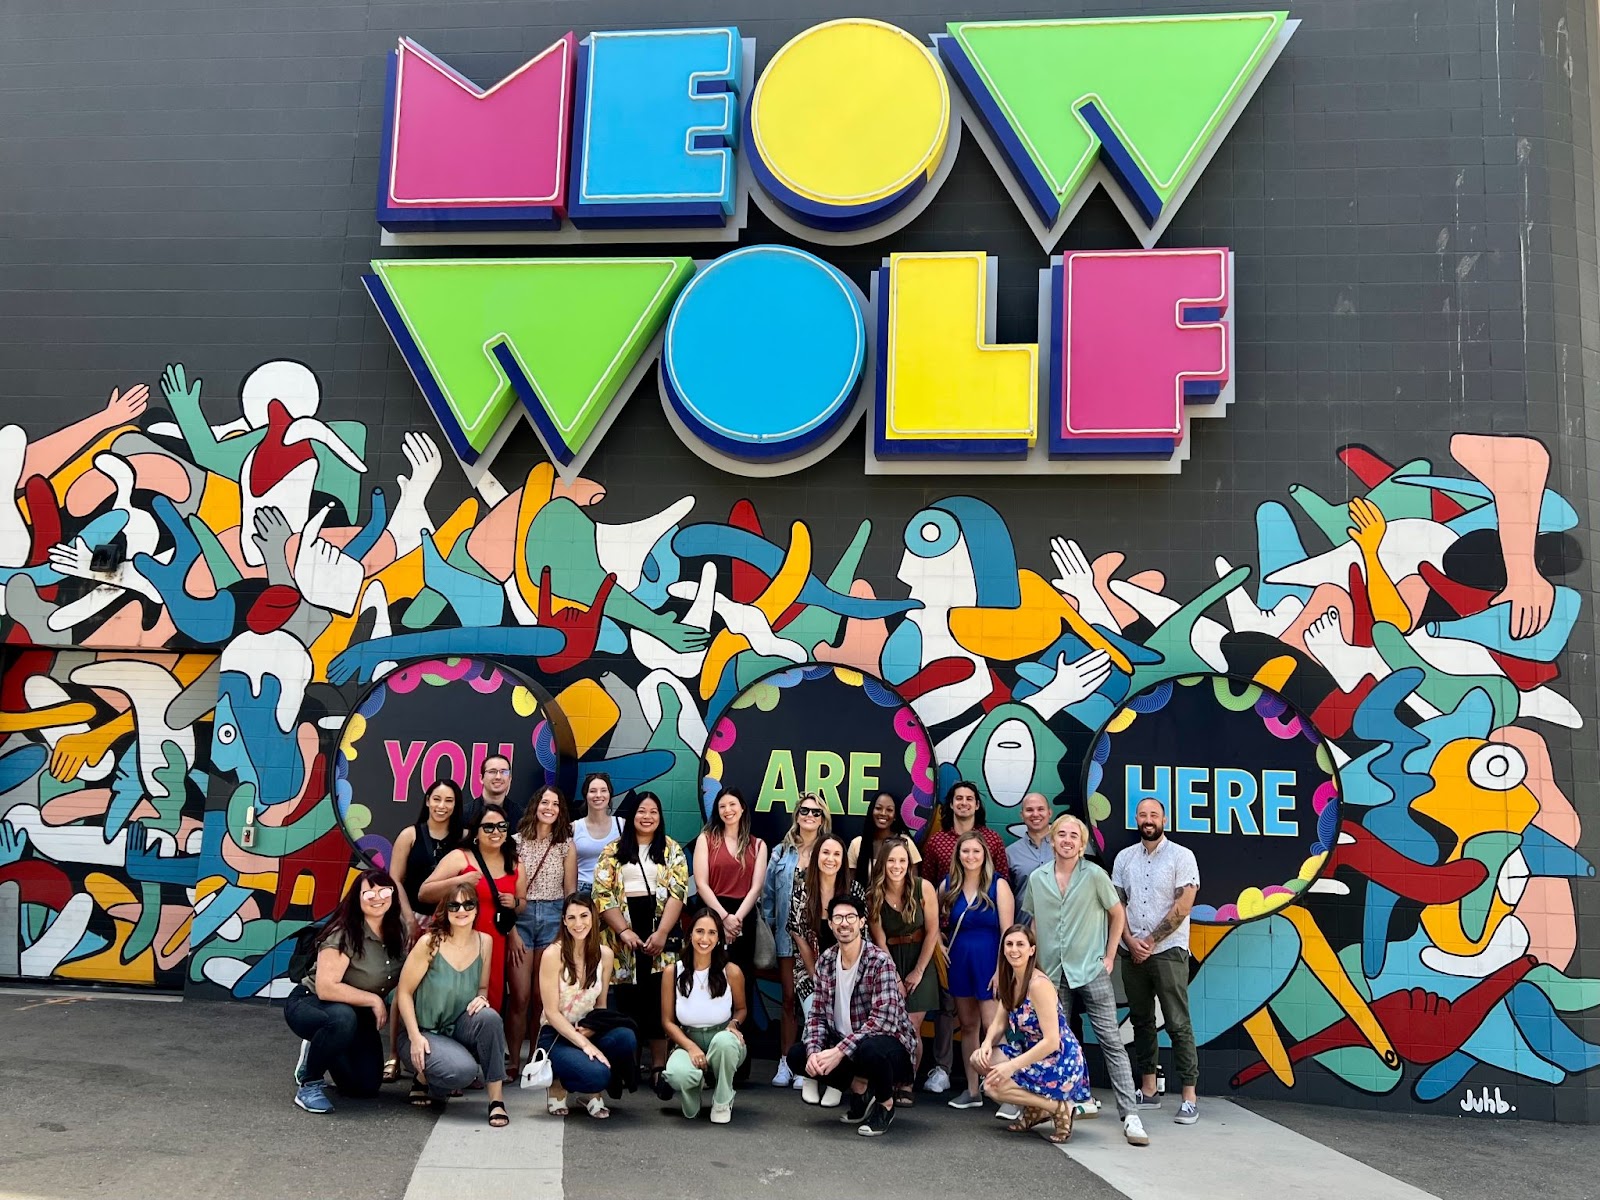 A group photo of the JDM Team at the Meow Wolf exhibit in Denver, Colorado.